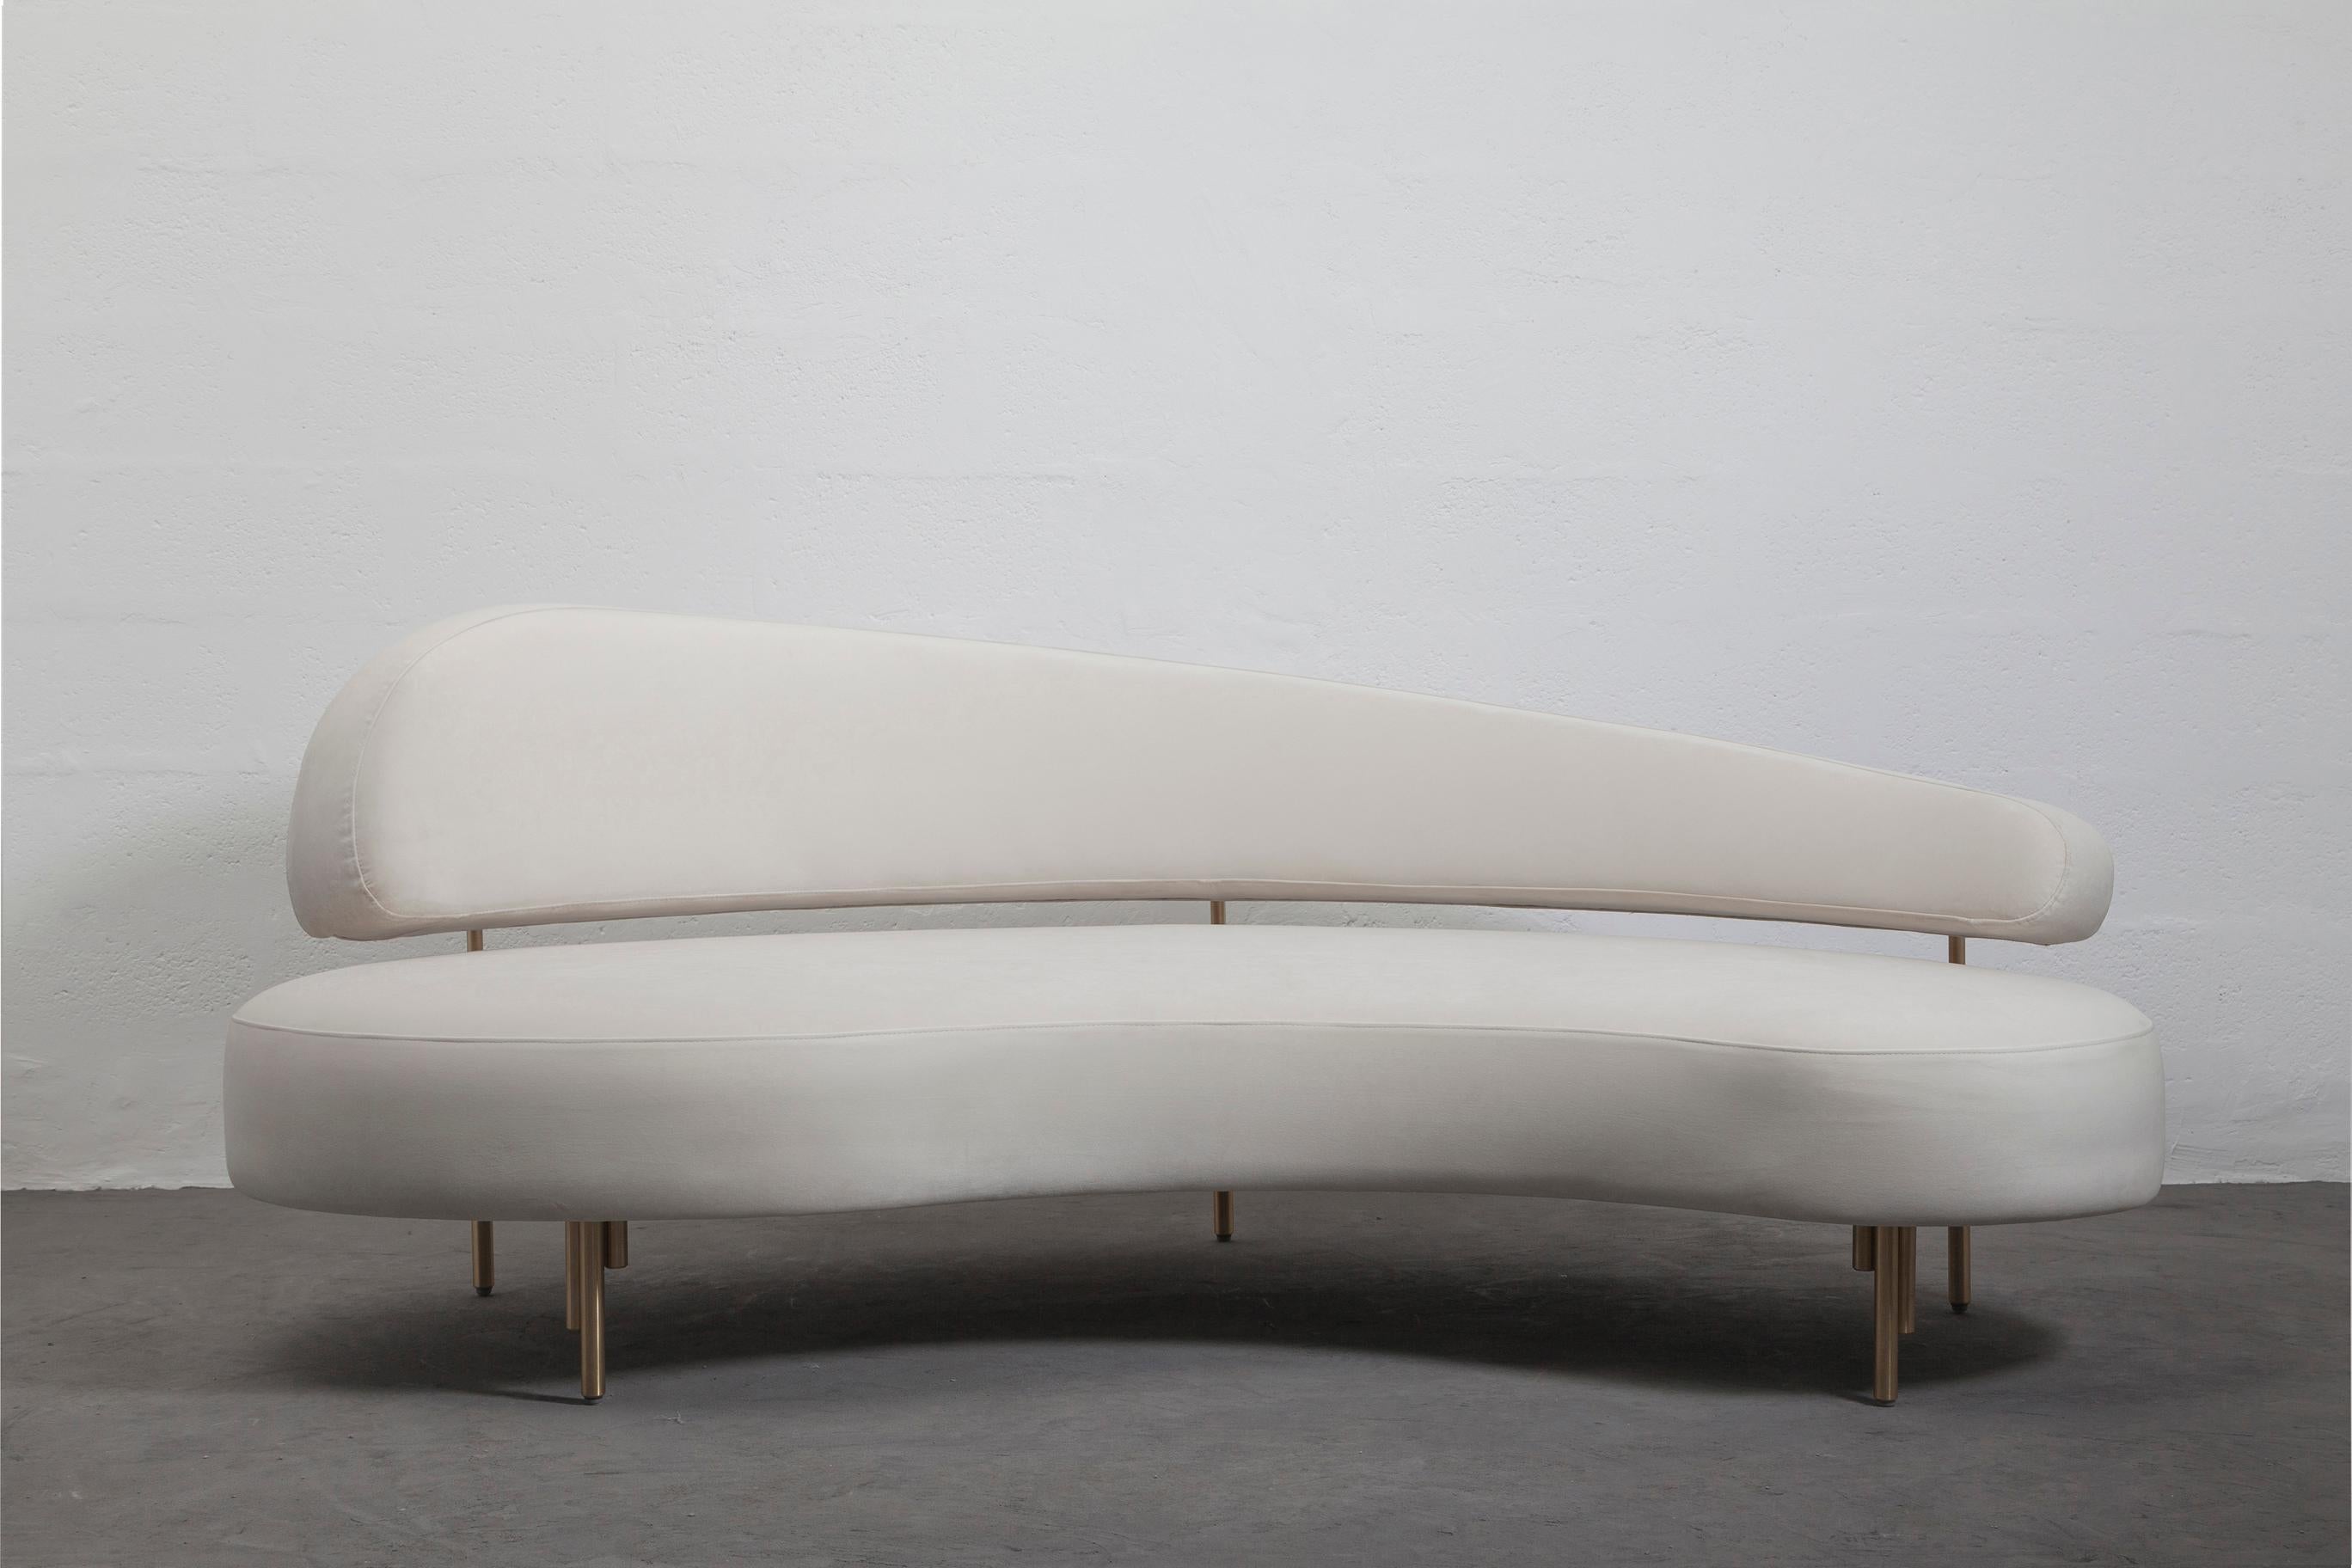 Velvet upholstered 3-seater sofa with lathed bronze or stainless steel legs and hardware. Available in Ivory, Olivo, Ochre, and ÉBANO velvet upholstery options.

The SITIERA_01 sofa combines a modern, streamlined design with hardware accents that